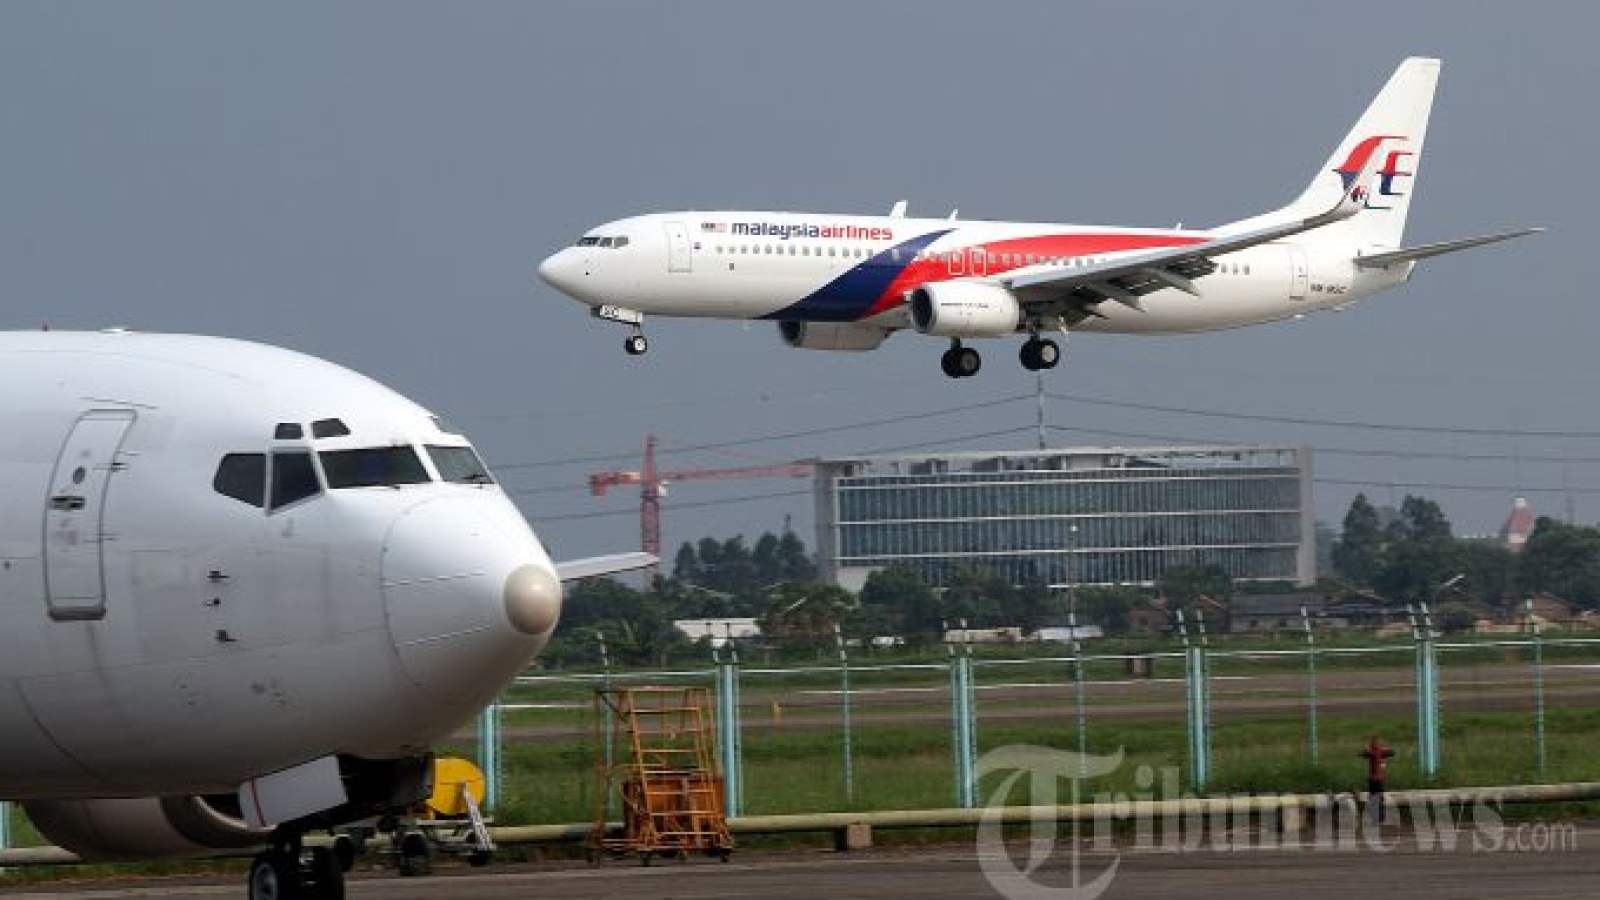 20130527_malaysia-airlines_3862